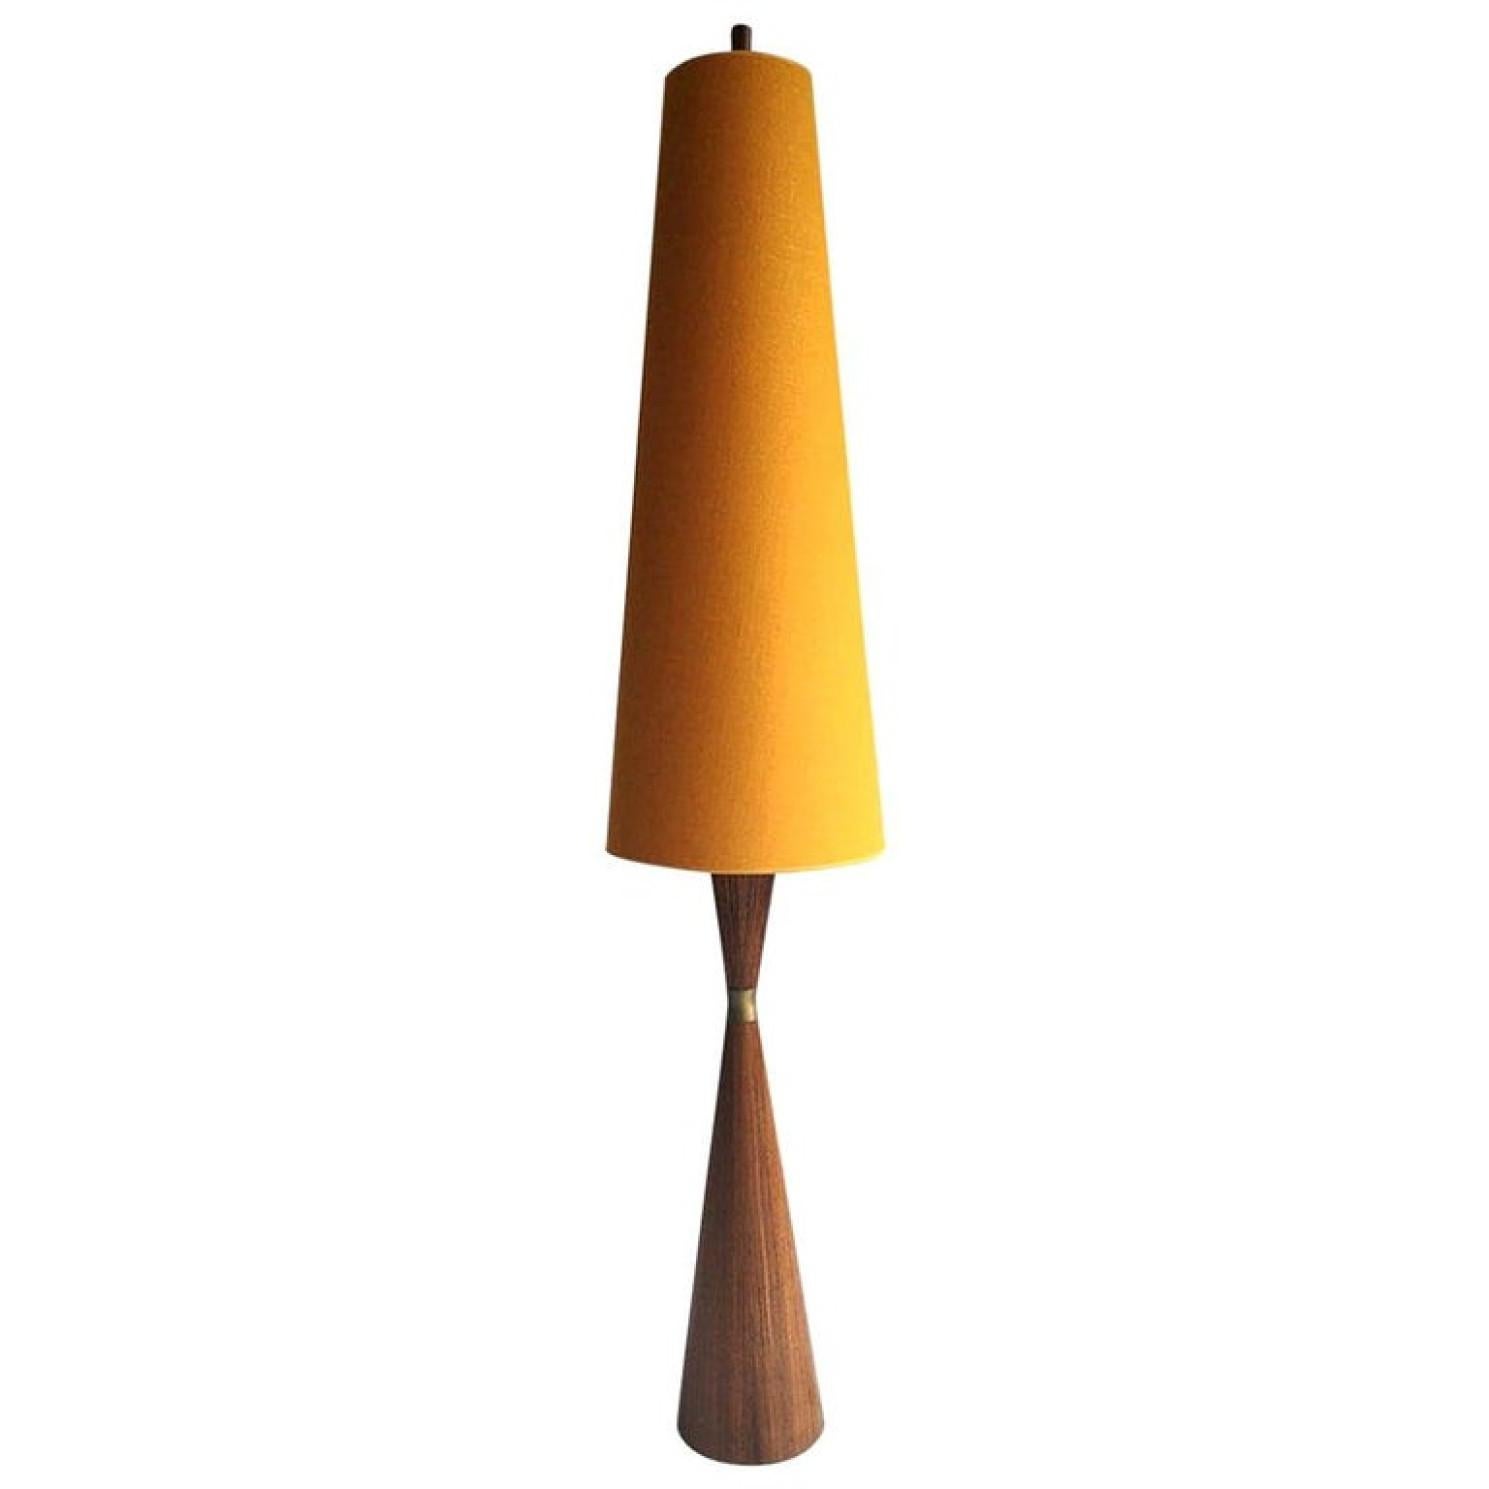 This rare modern teak diablo floor lamp was designed in the 1960s. The base is weighted for a sturdy. Very elegant and unusual. A copper cuff sits in the center. The new upholstered linen shade provides a warm glow.

In very good vintage condition.

